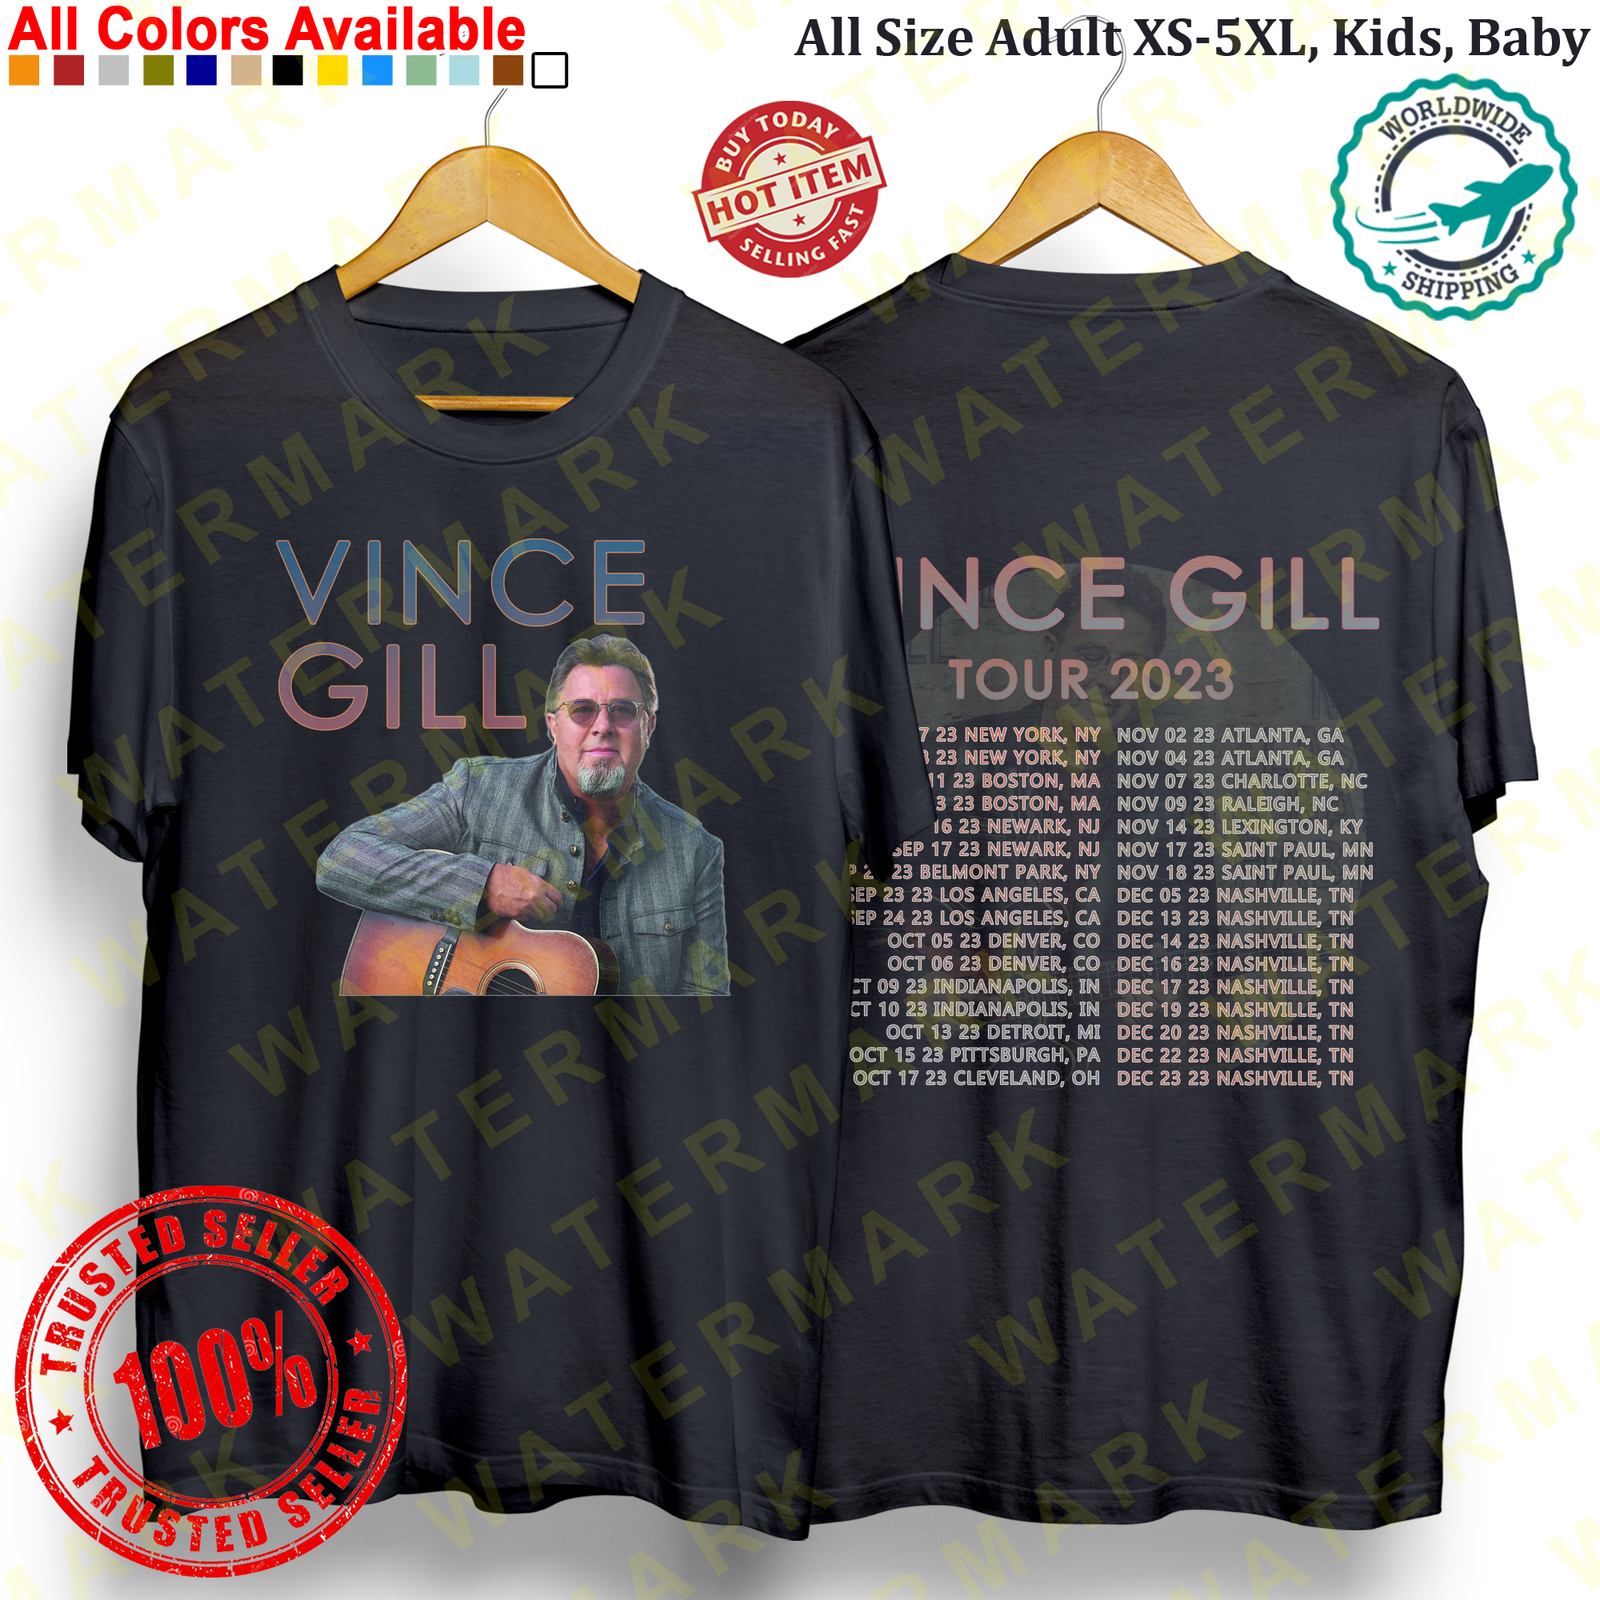 Primary image for VINCE GILL TOUR 2023 T-shirt All Size Adult S-5XL Kids Babies Toddler